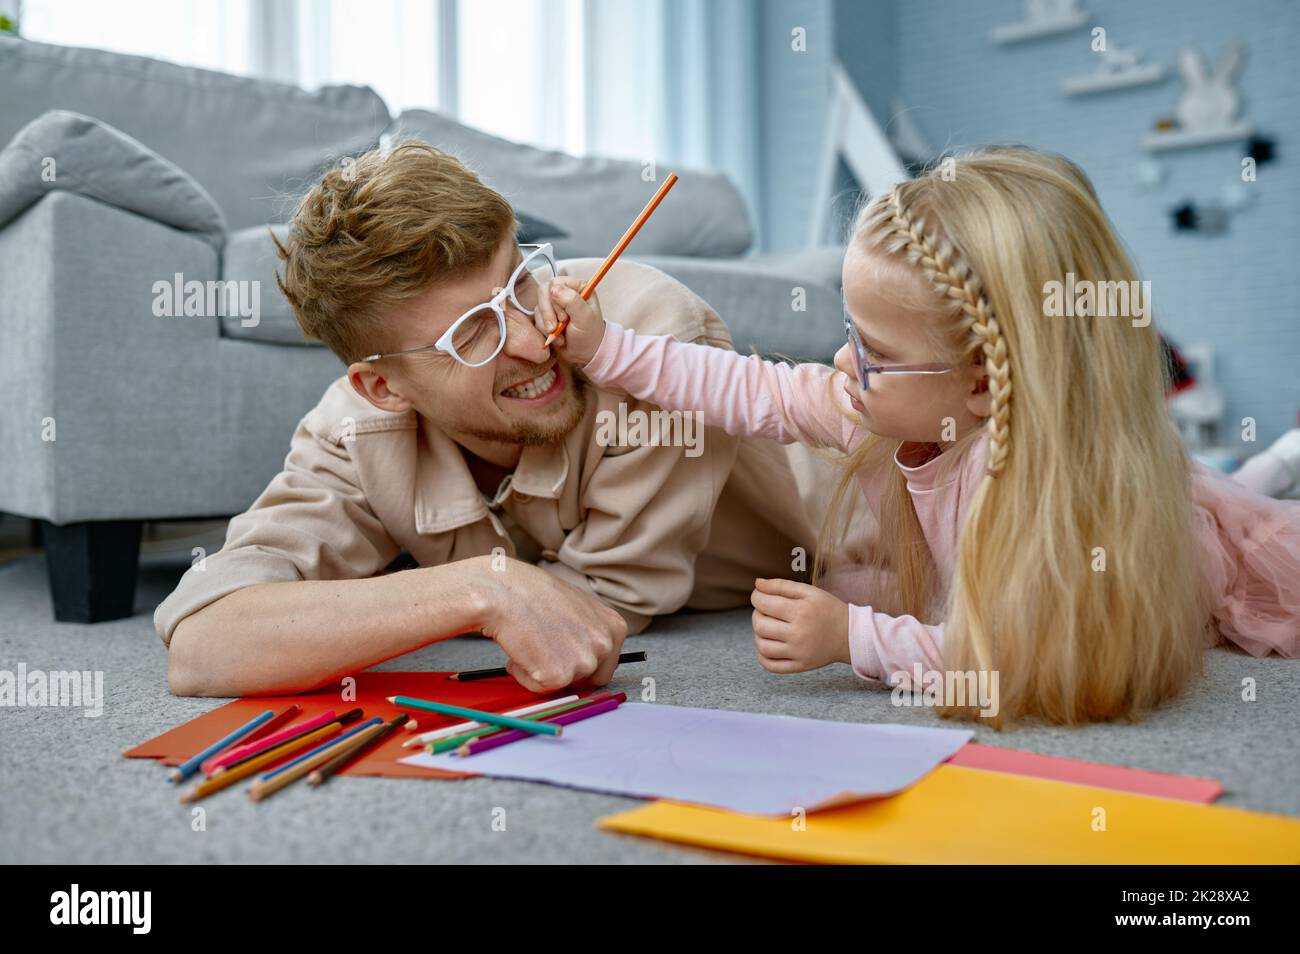 Father and daughter having fun together at home Stock Photo